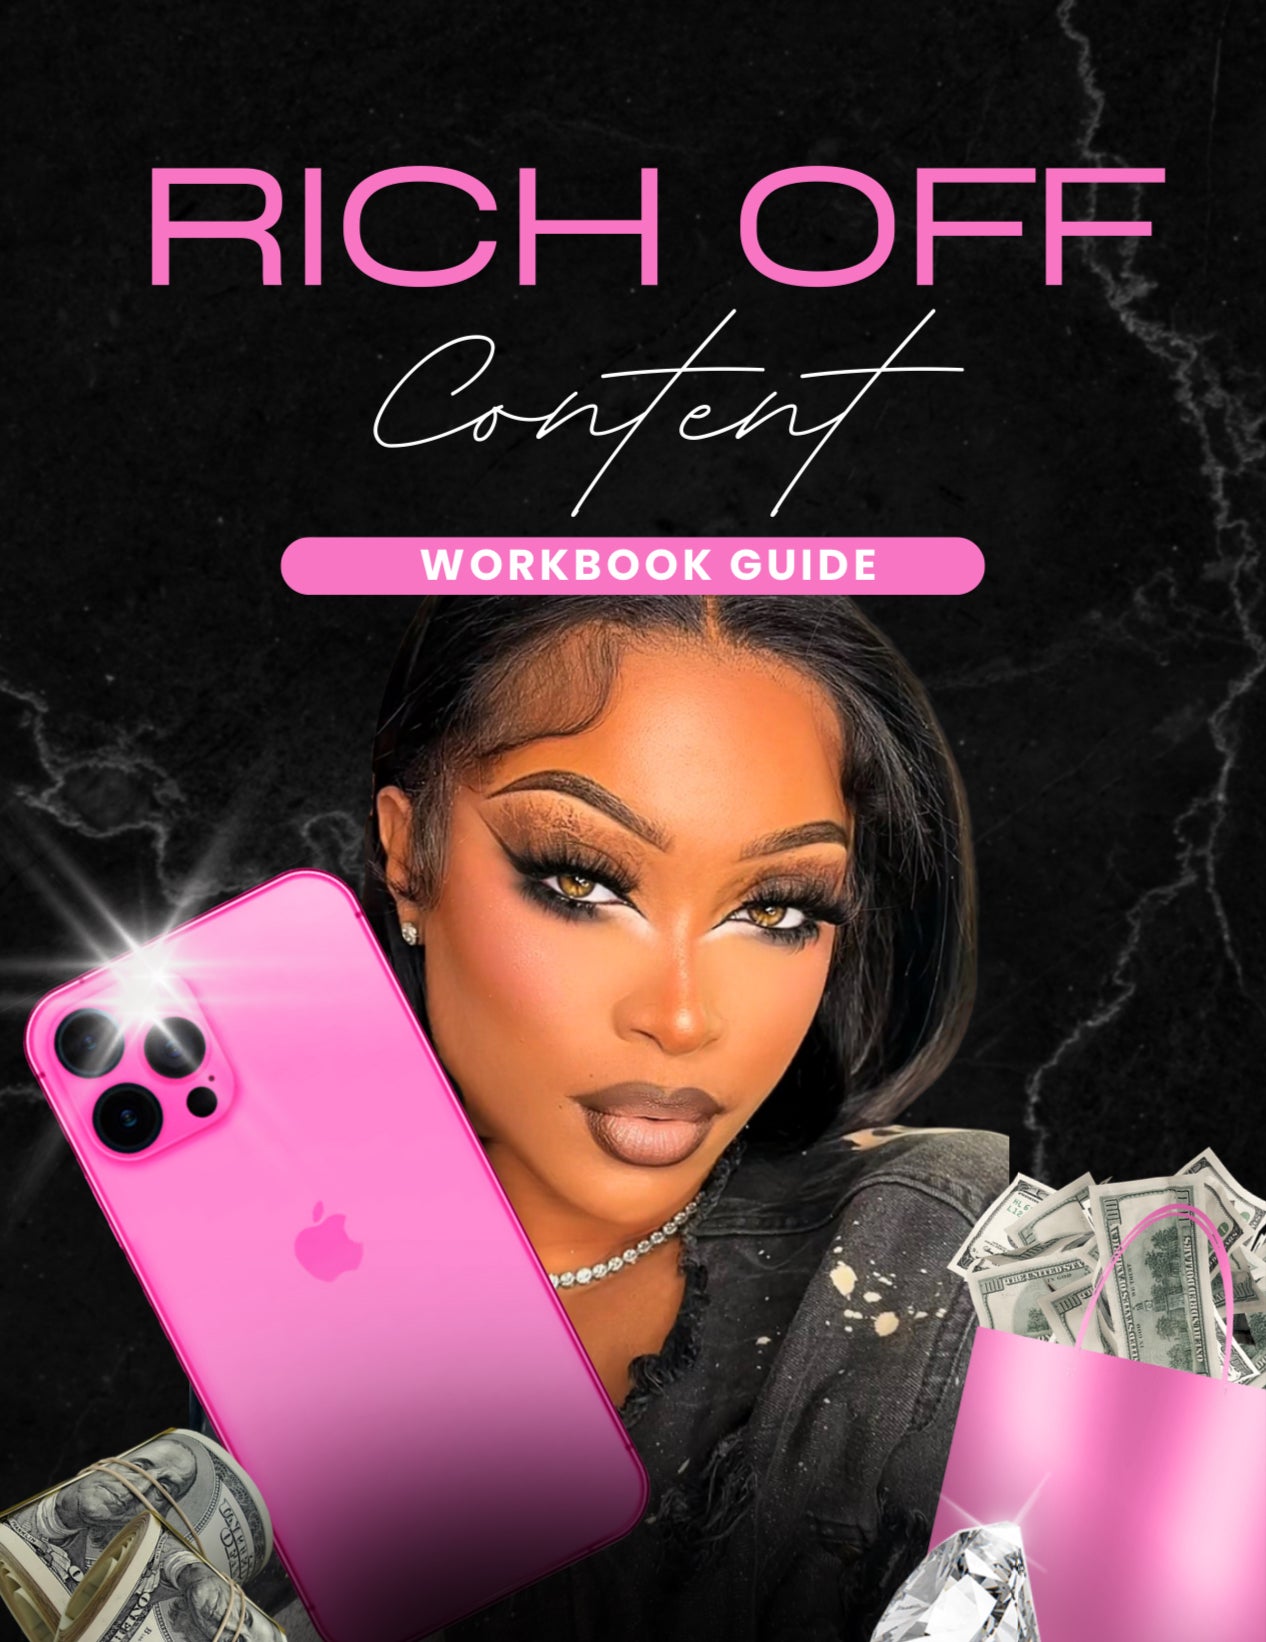 “Rich Off Content” Workbook Guide 💰